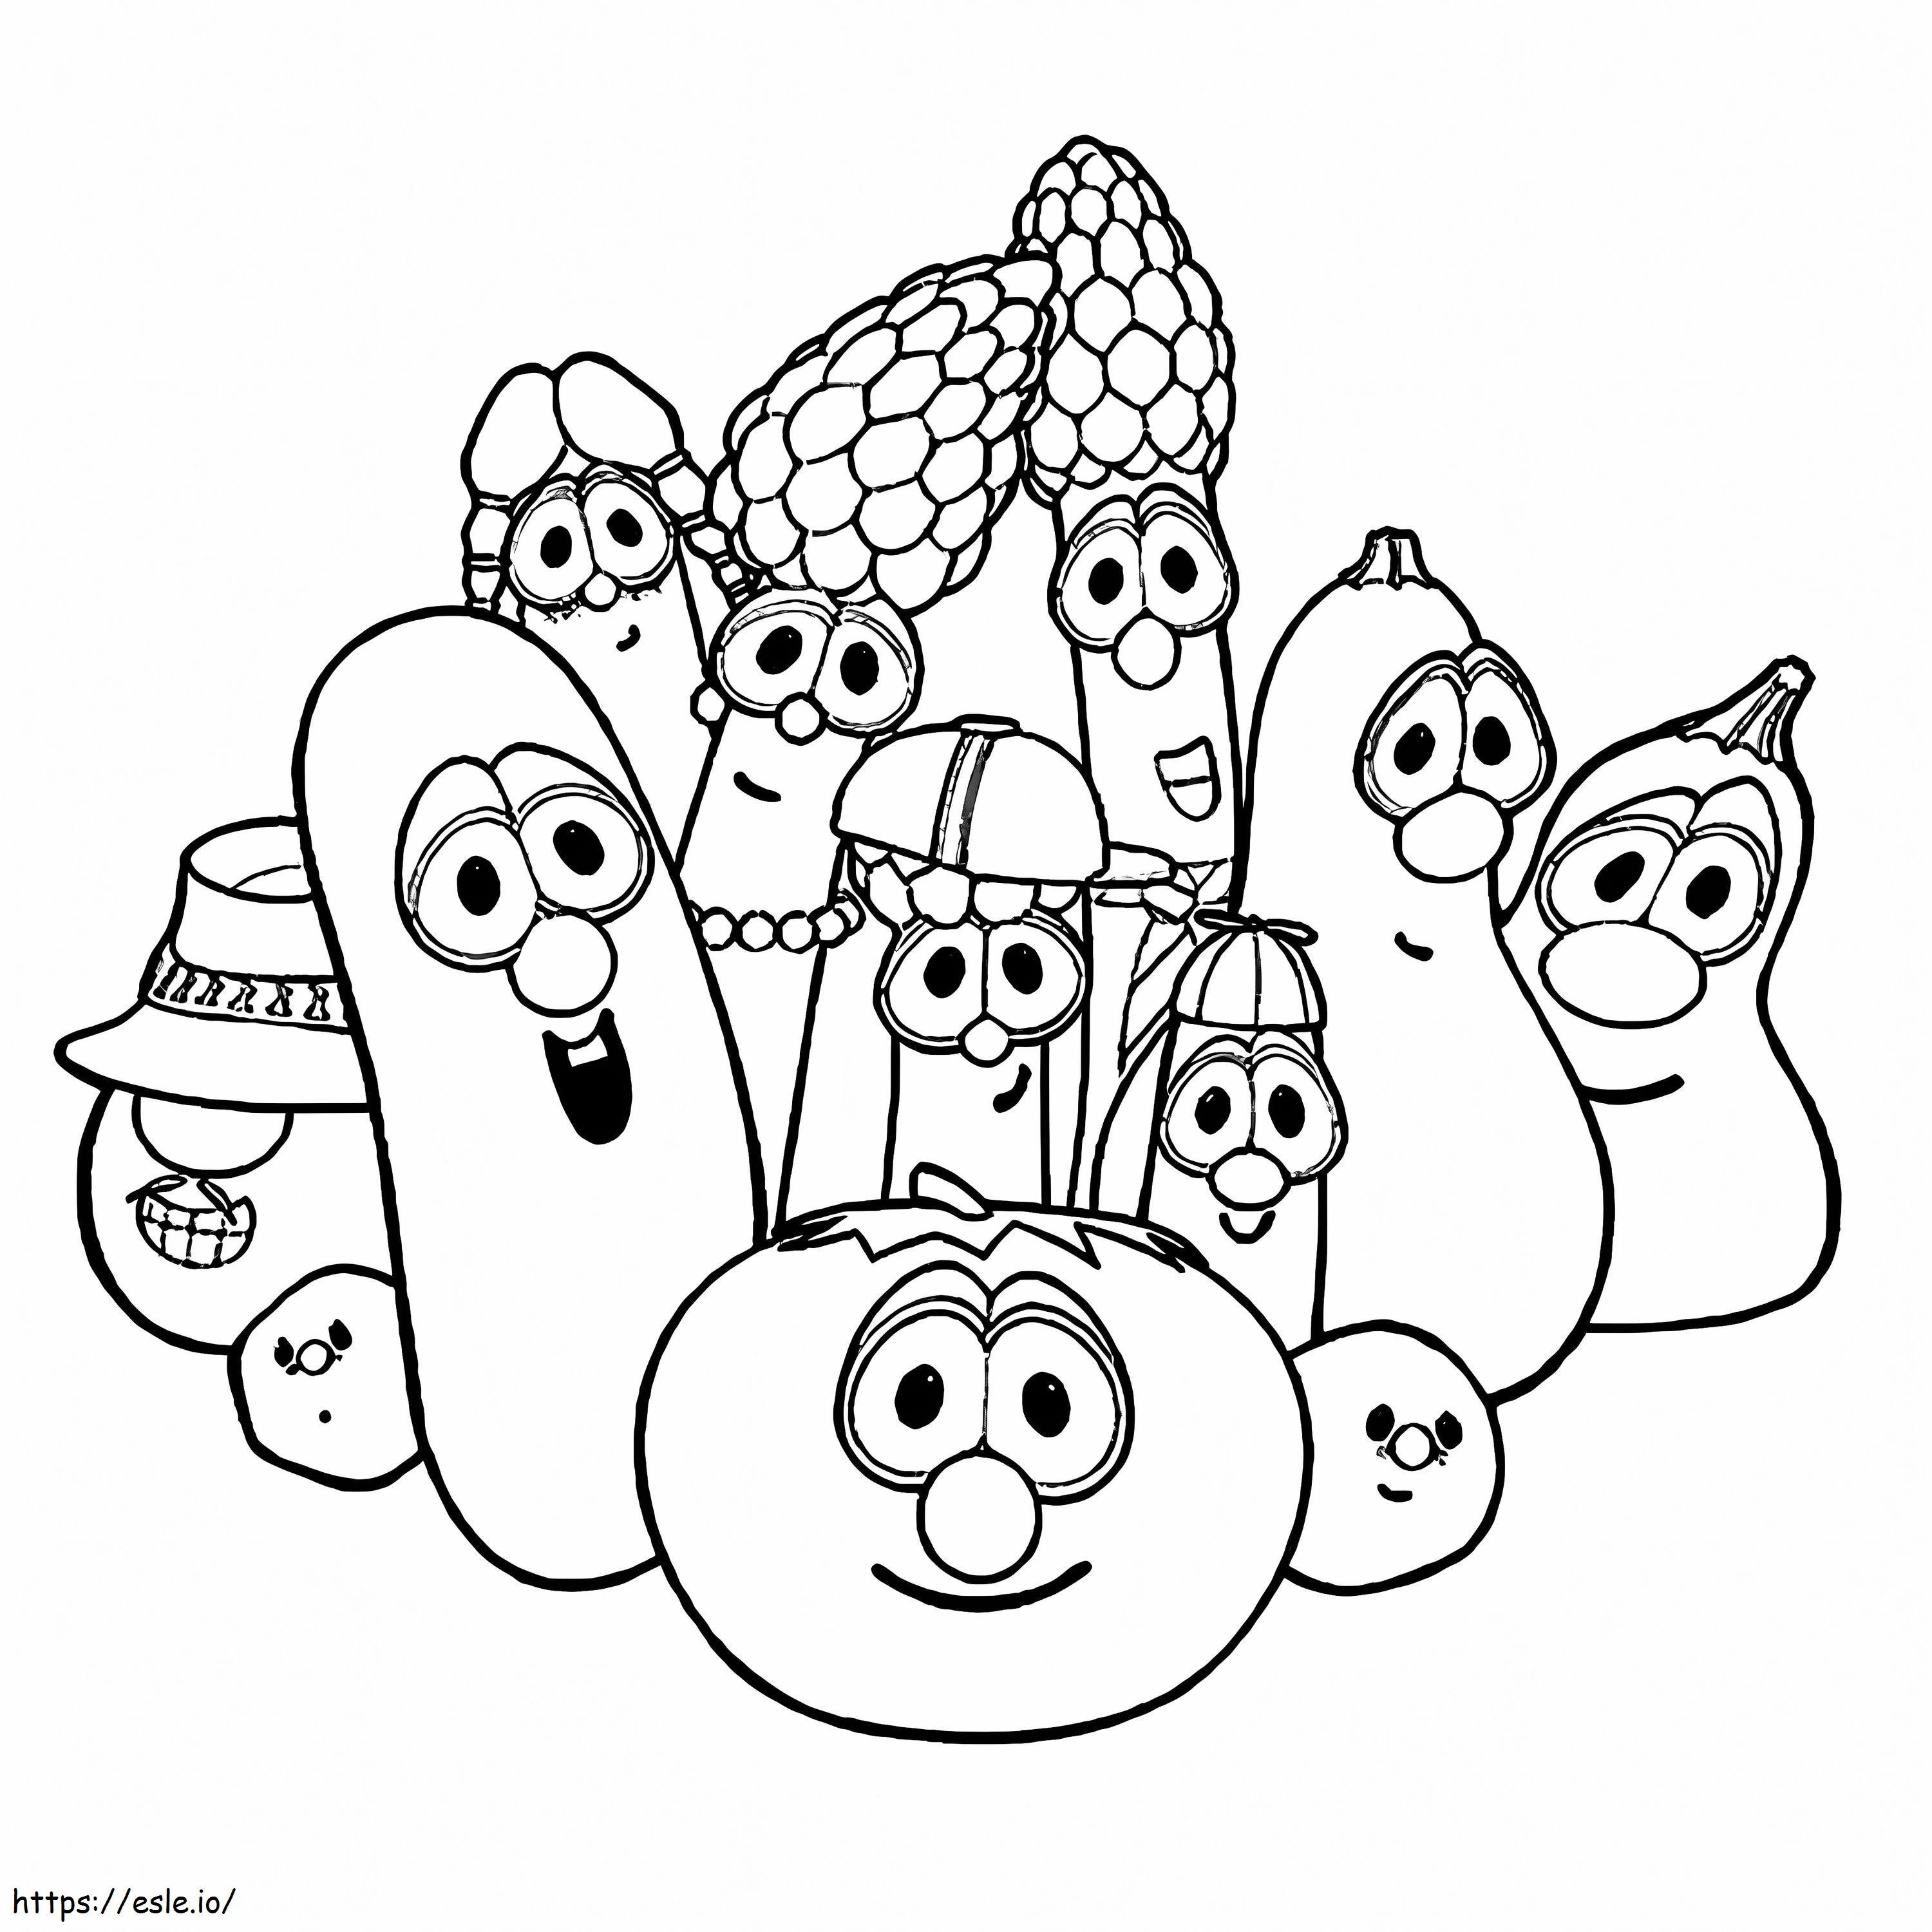 Cartoon Vegetables coloring page